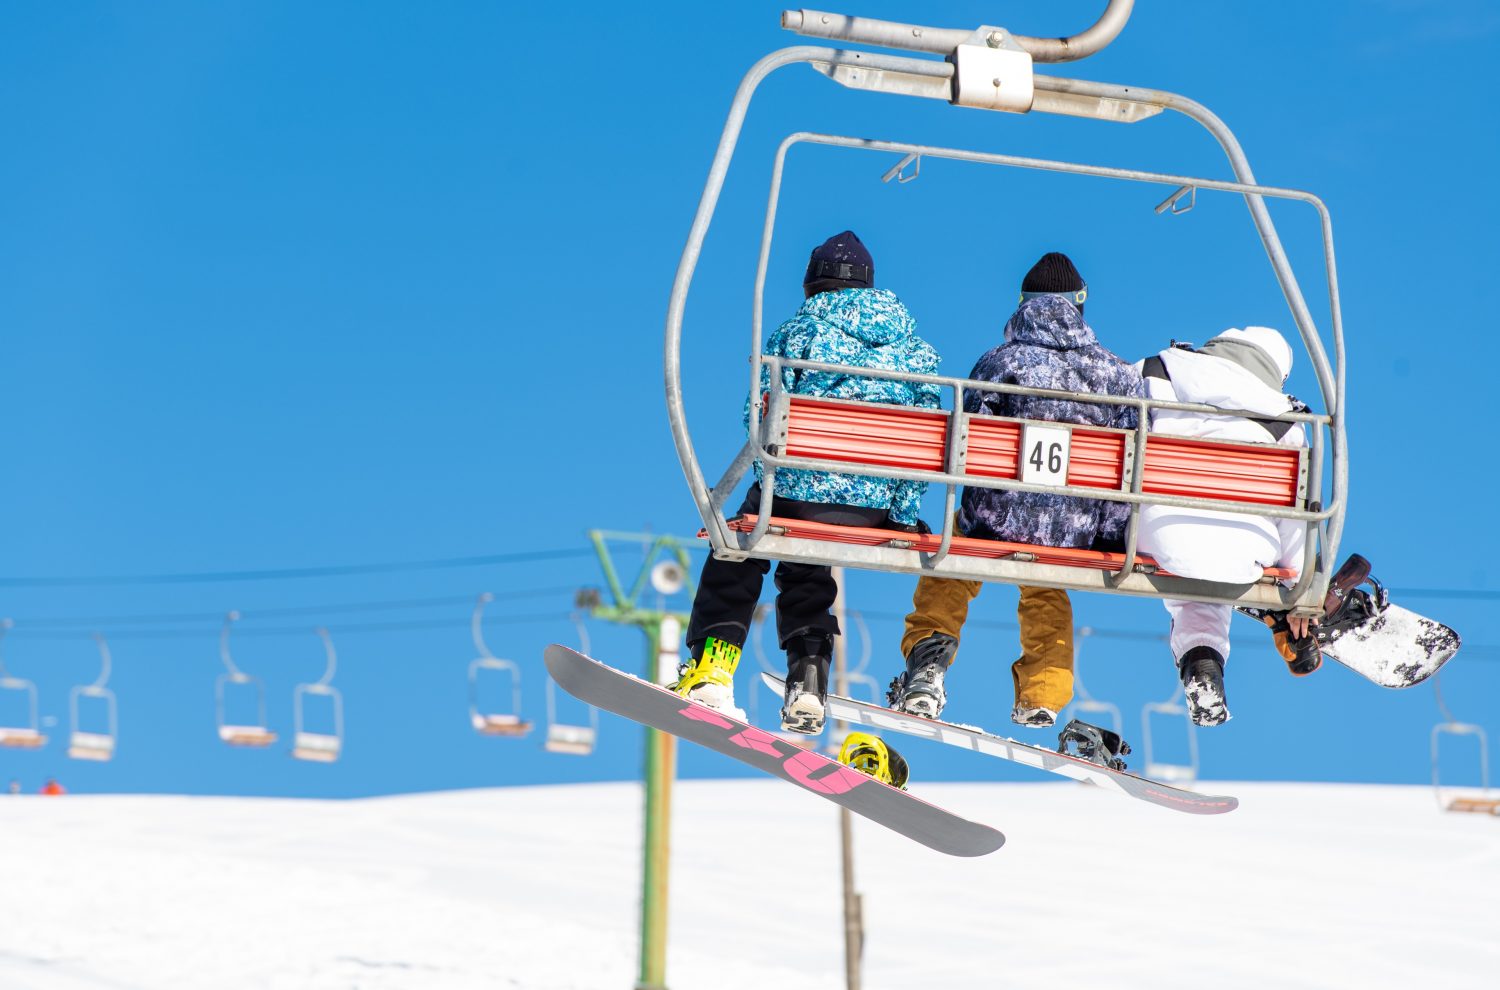 Here's How to Get On & Off the Ski Lift